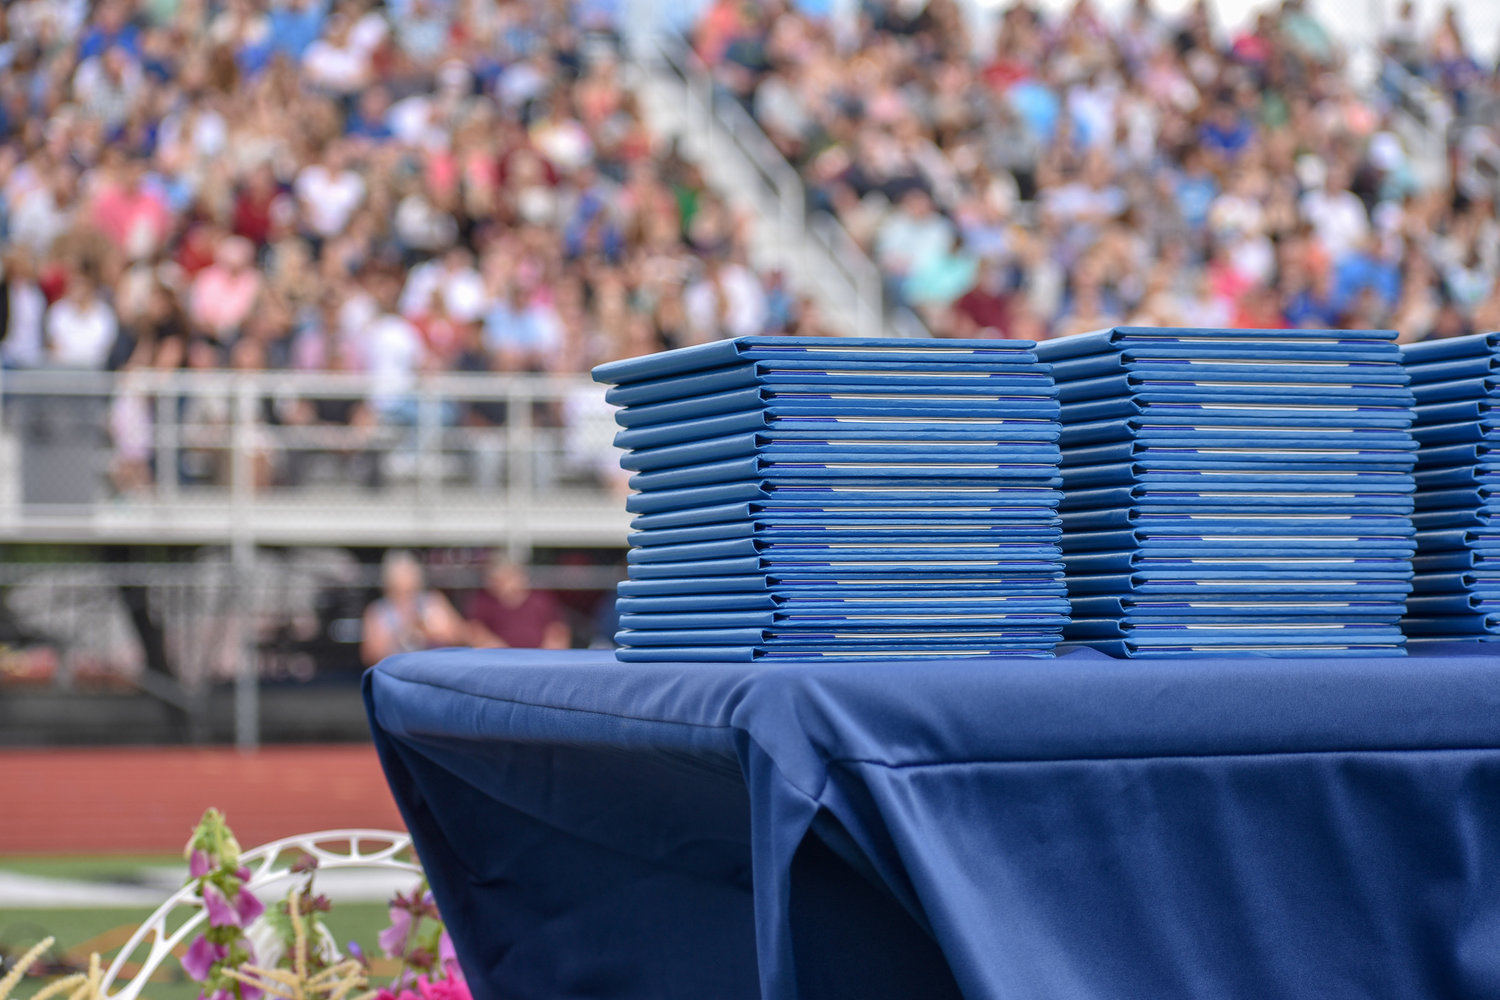 Pictured are the Camden Class of 2022's diplomas stacked nicely before the ceremony.